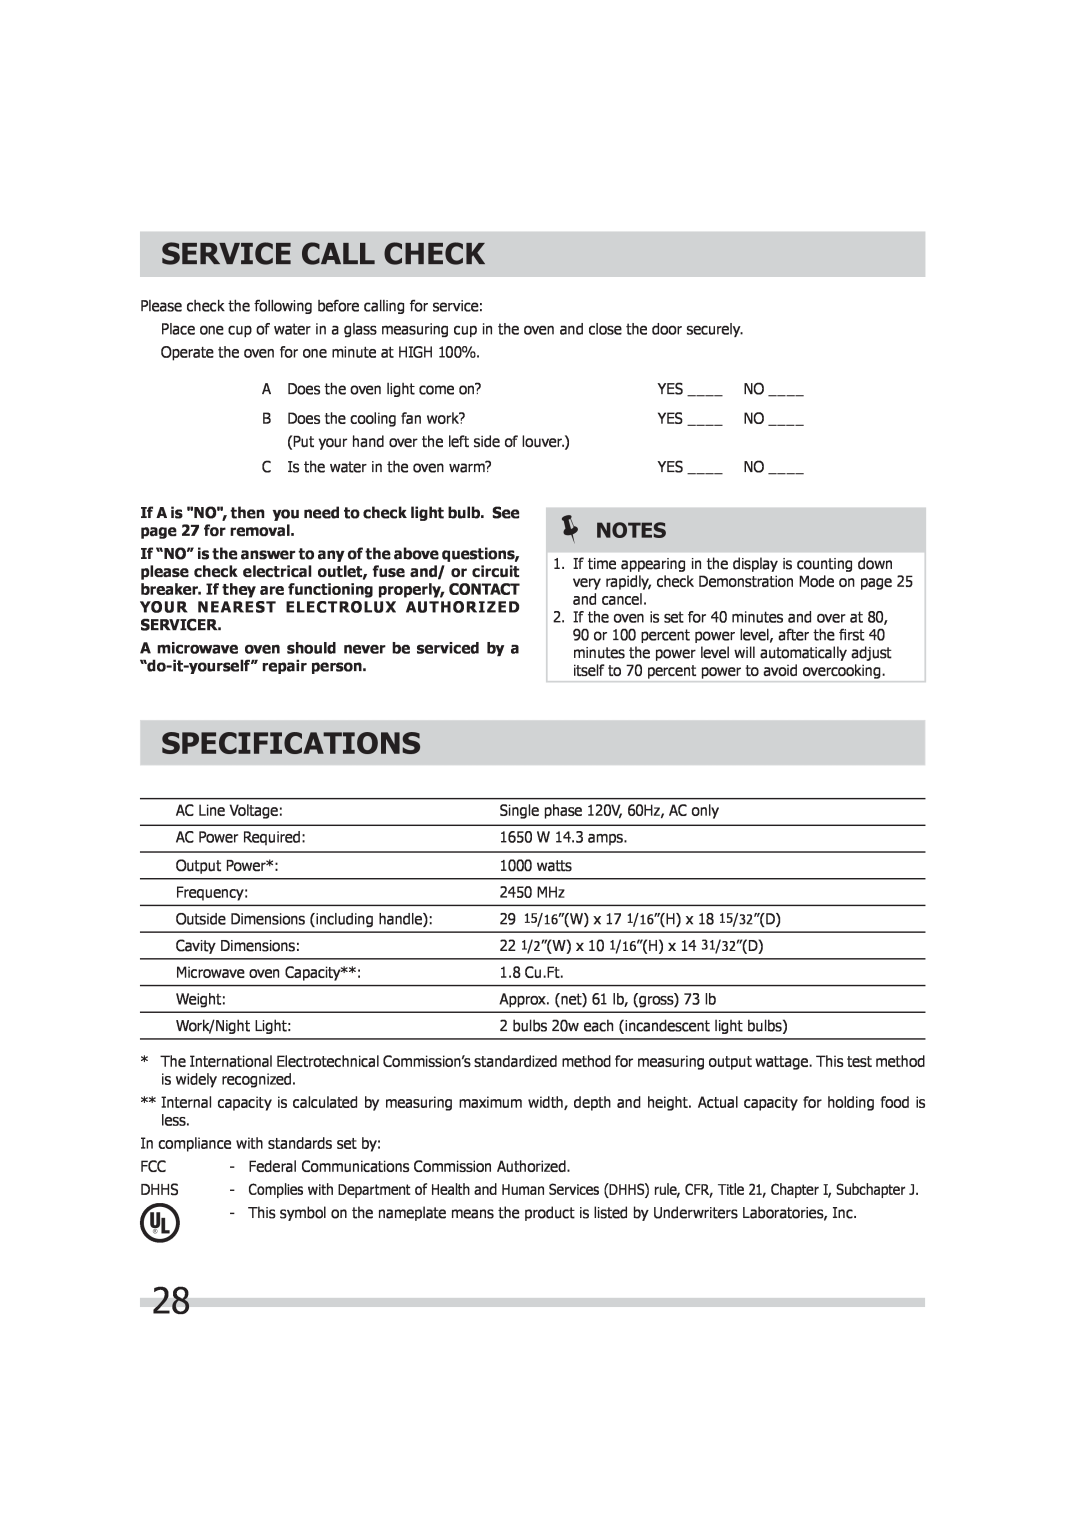 Frigidaire 316495055 important safety instructions Service Call Check, Specifications 